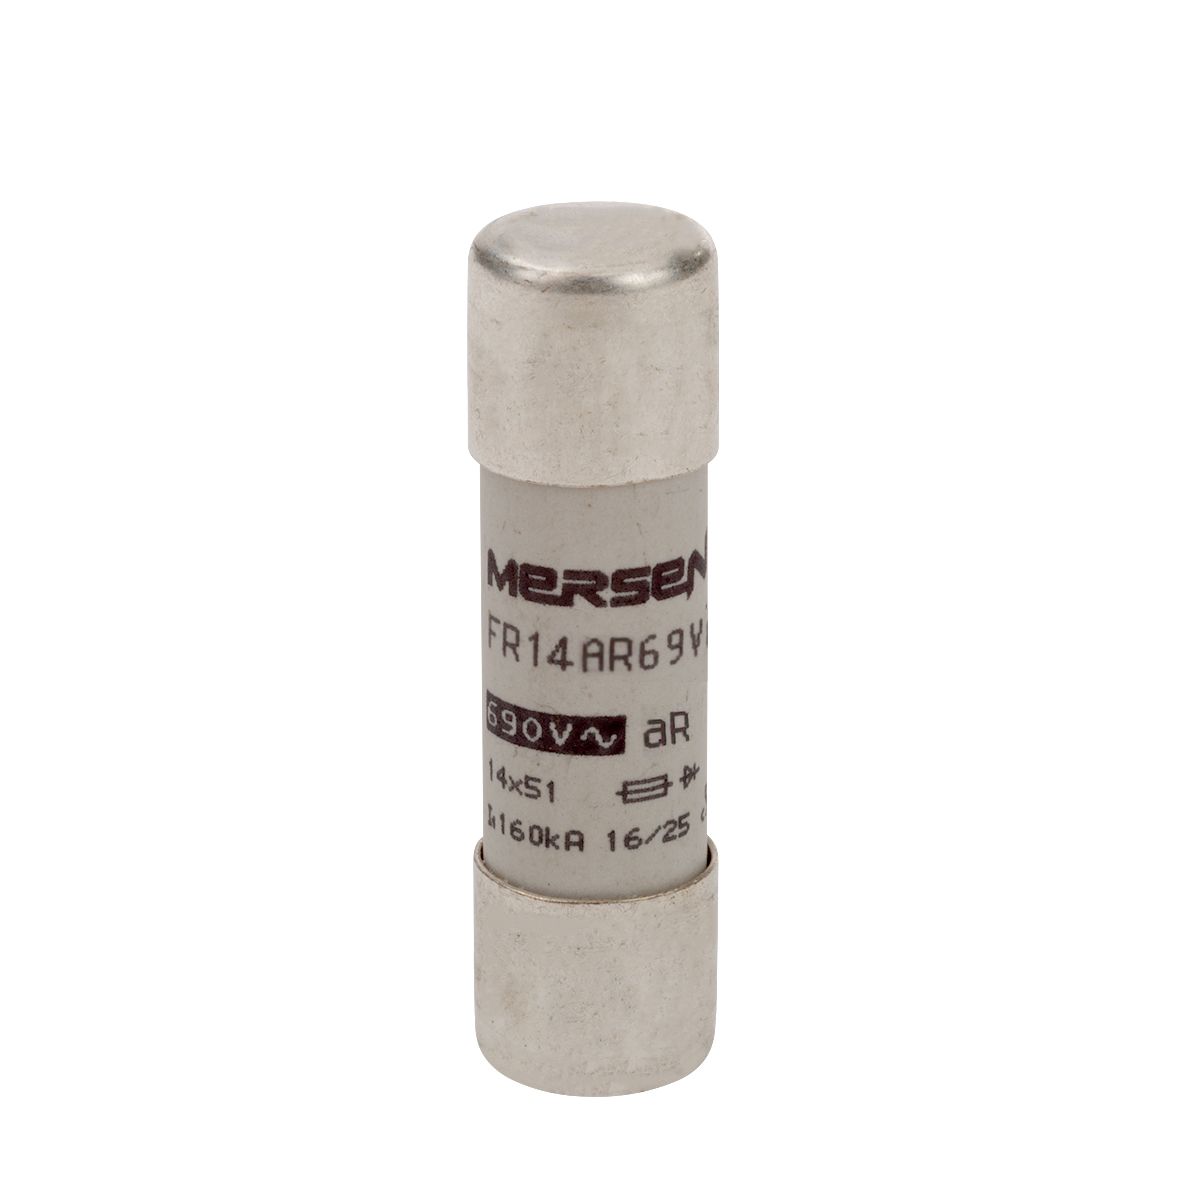 R1027333 - Cylindrical fuse-link aR 690VAC 14x51, 40A, without indicator